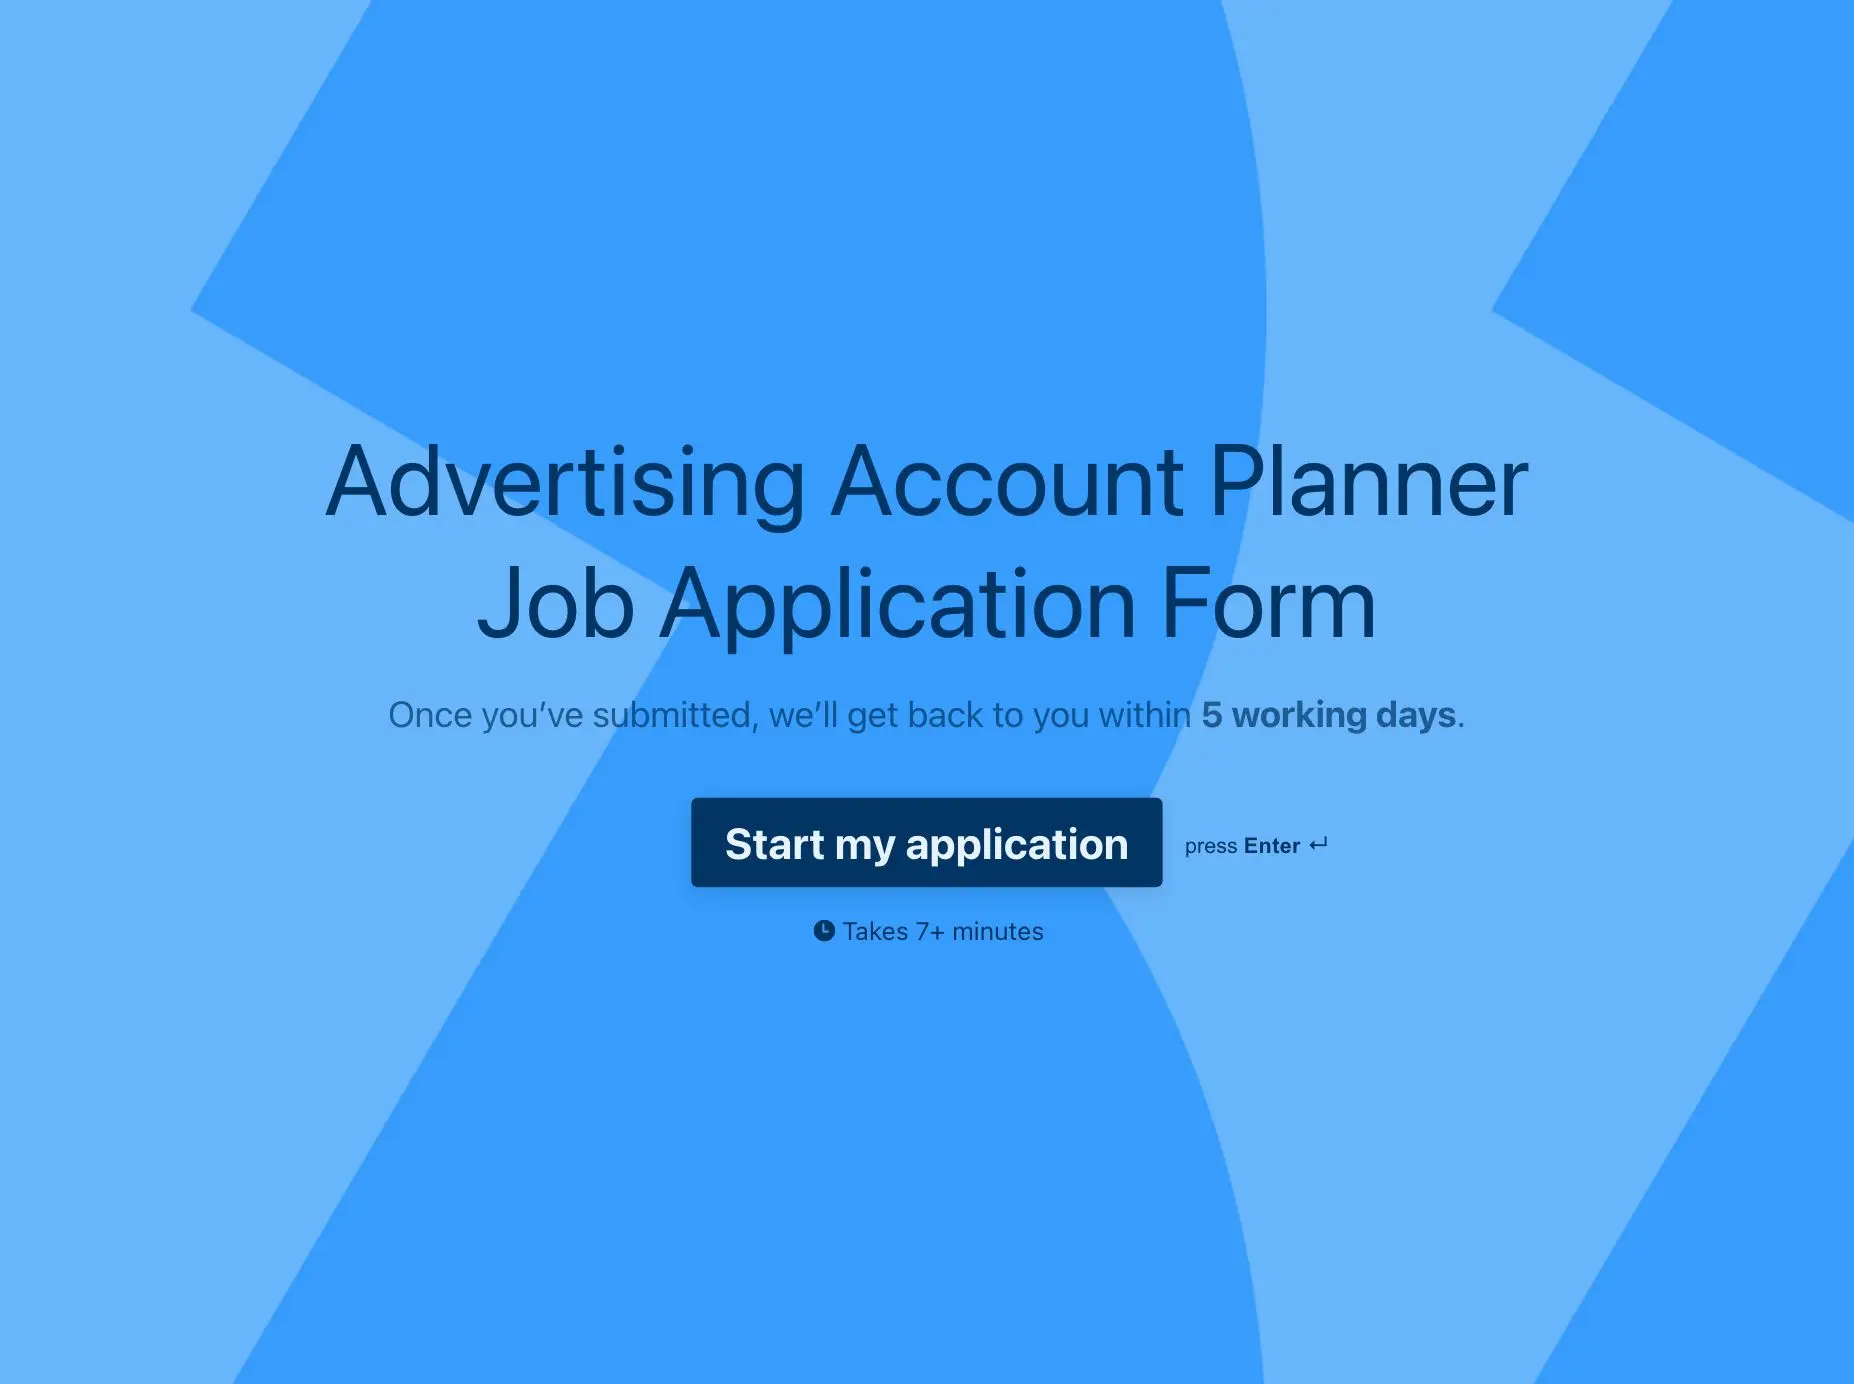 Advertising Account Planner Job Application Form Template Hero